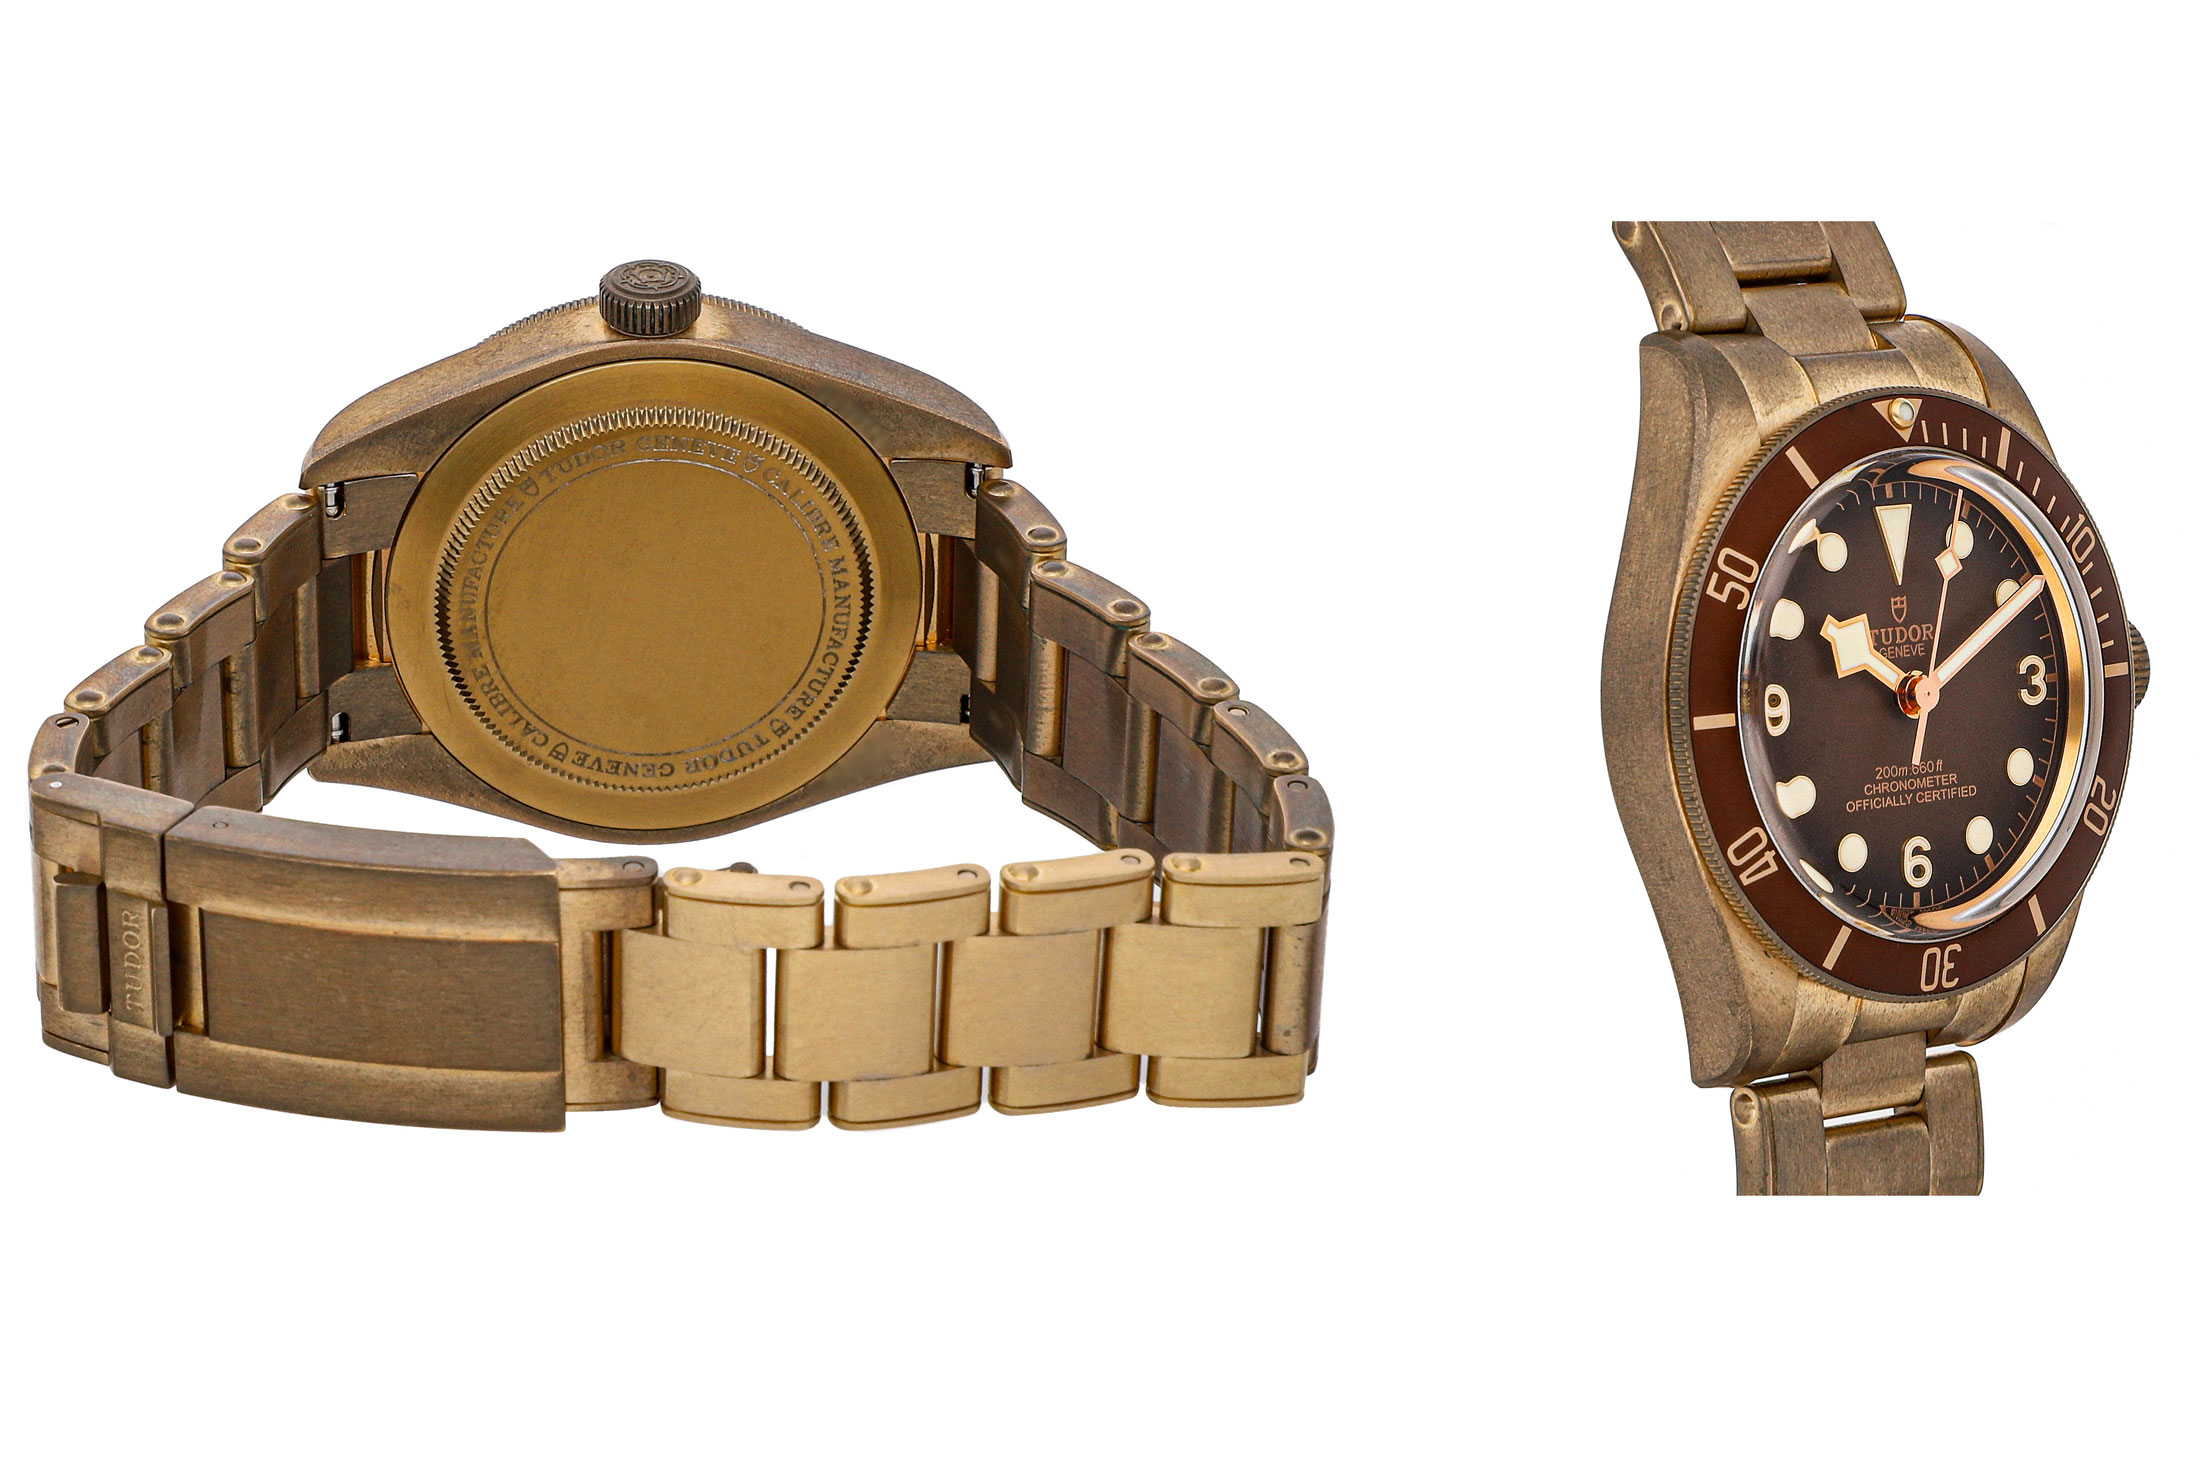 relates to Bronze Watches Quickly Lose Their Luster. That’s Why People Like Them